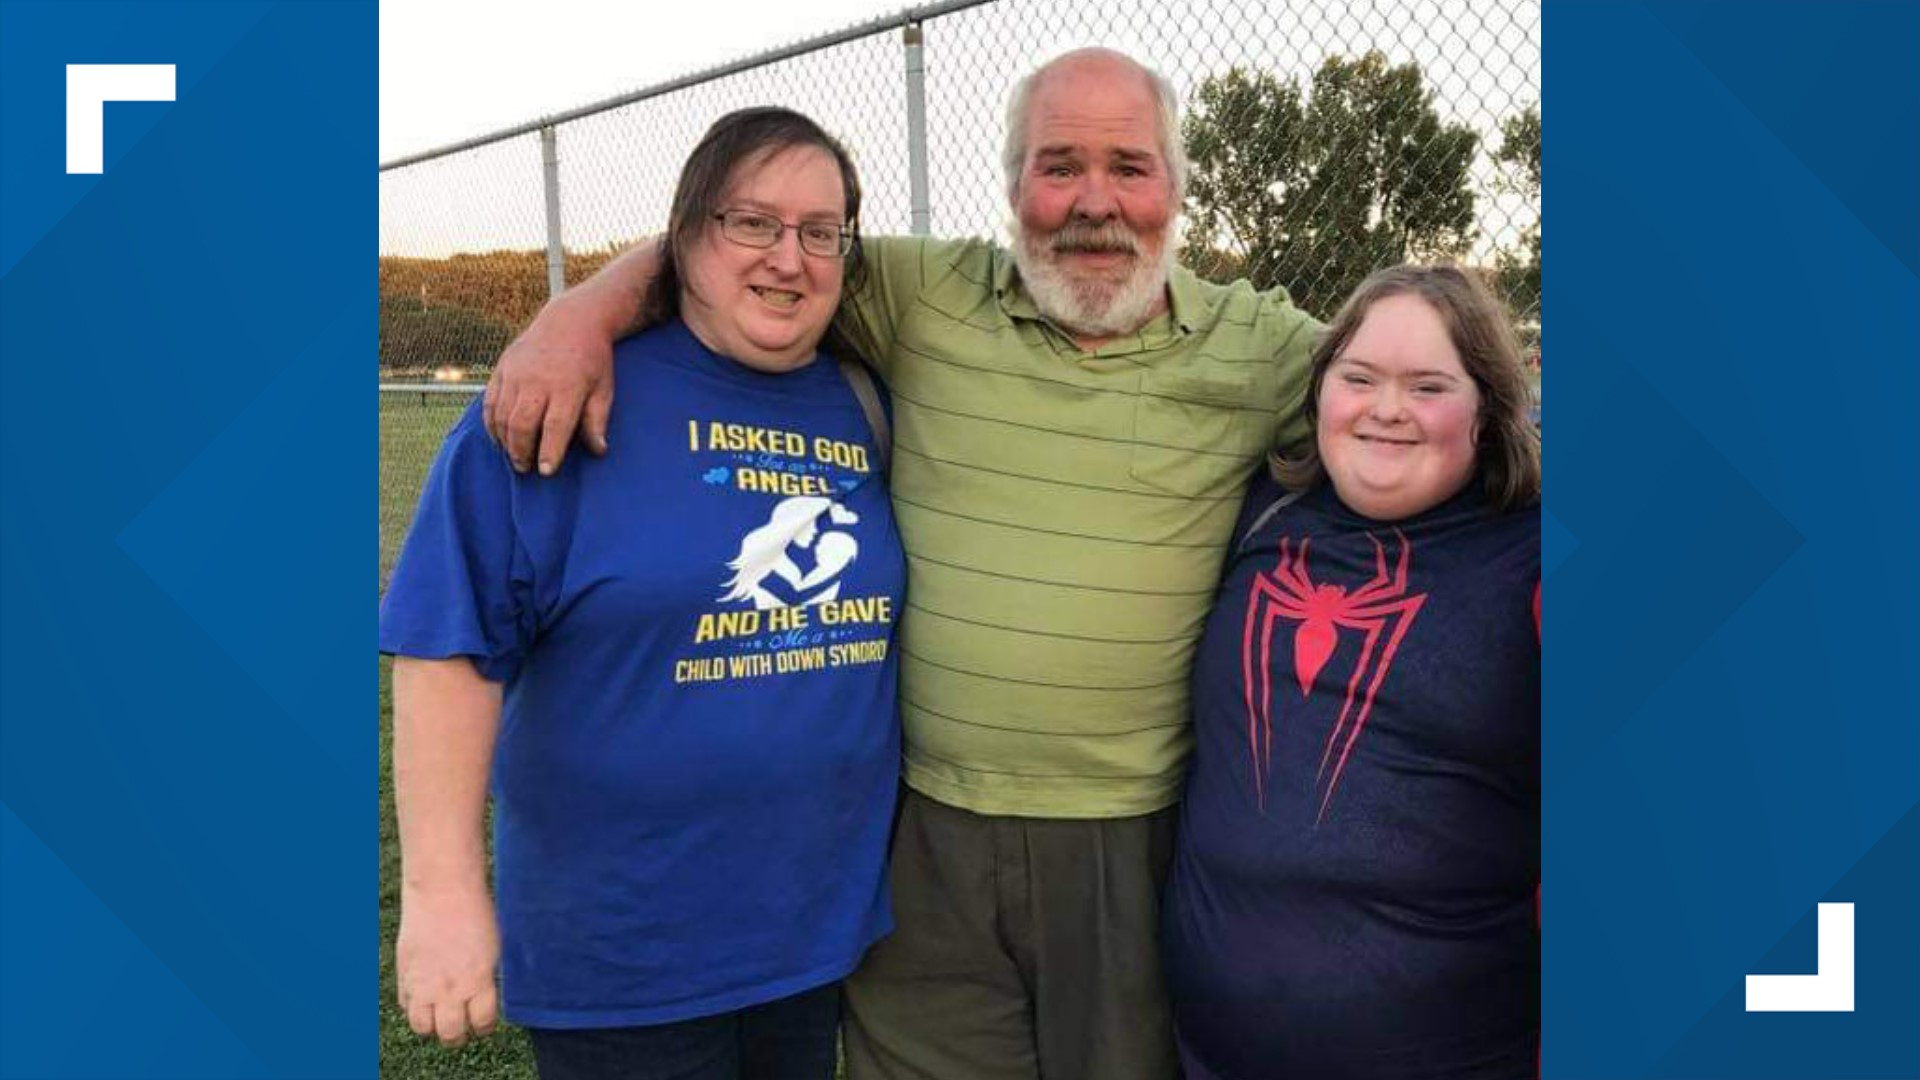 The fire on Bolenhill Avenue in Columbus took the lives of 61-year-old Mark Nibert, 61-year-old Linda Nibert and 19-year-old Sara Nibert.